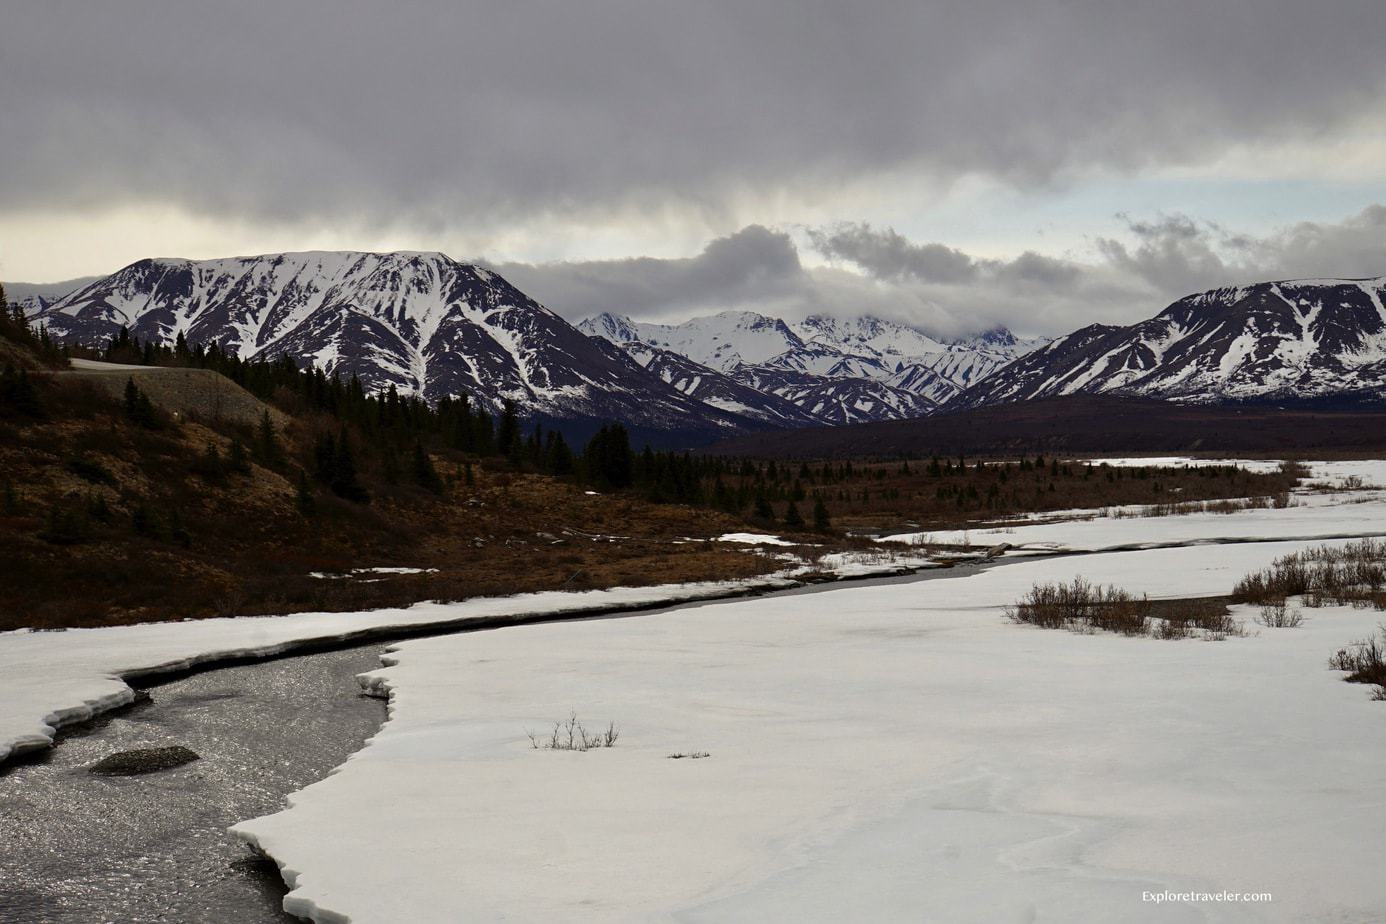 The spring thaw of the River and mountains Denali National Park